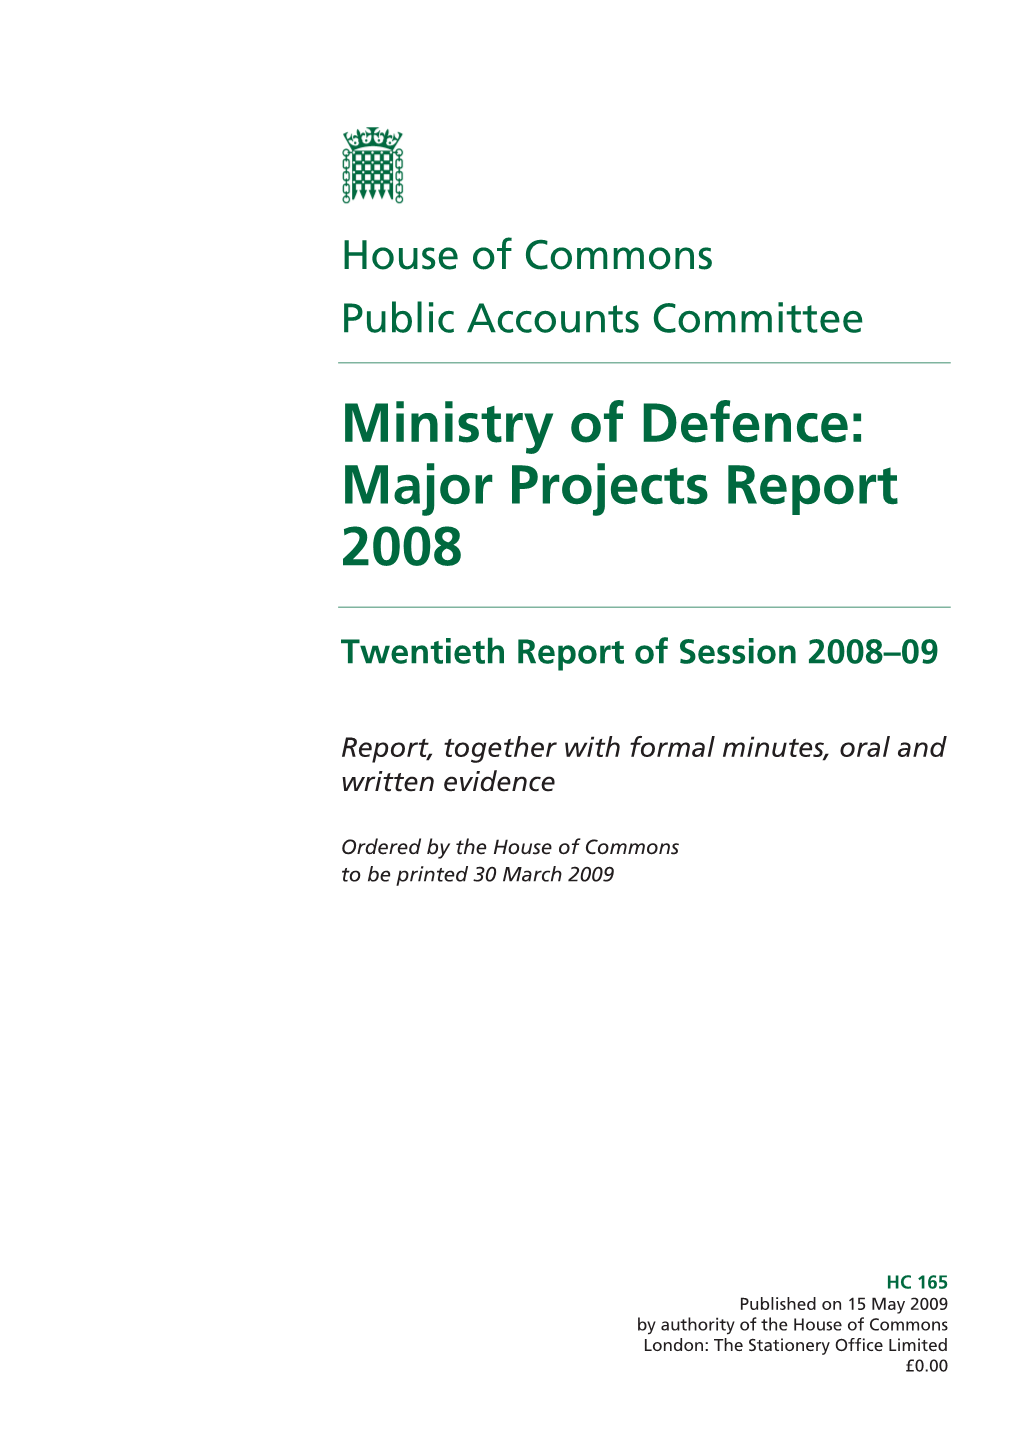 Ministry of Defence: Major Projects Report 2008